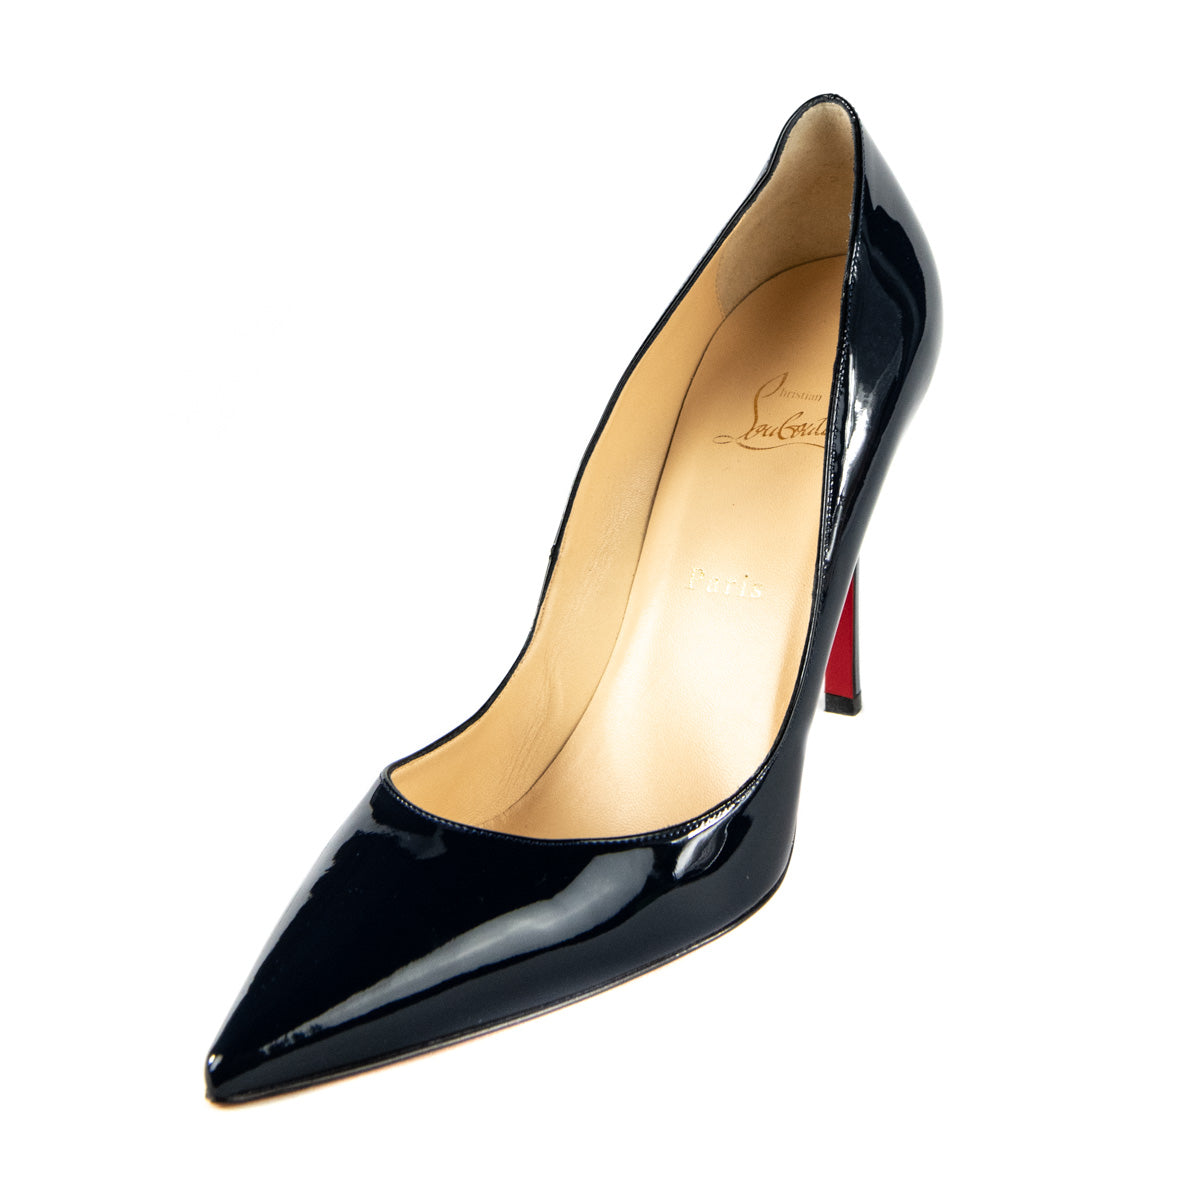 Christian Navy Patent Leather So Kate Pumps